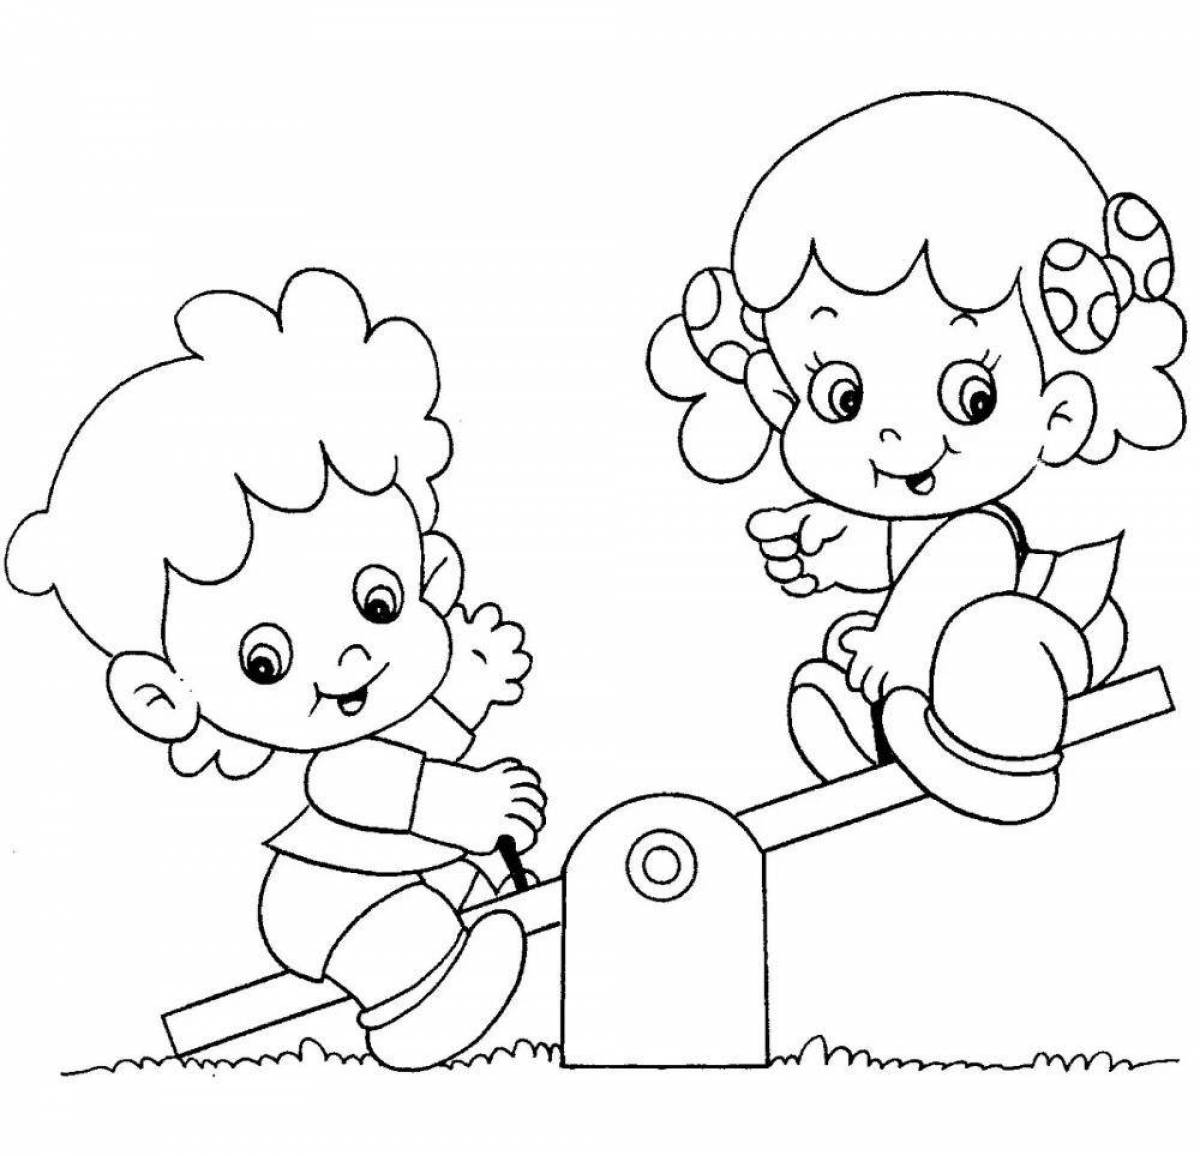 Color-lively coloring page for children's rights